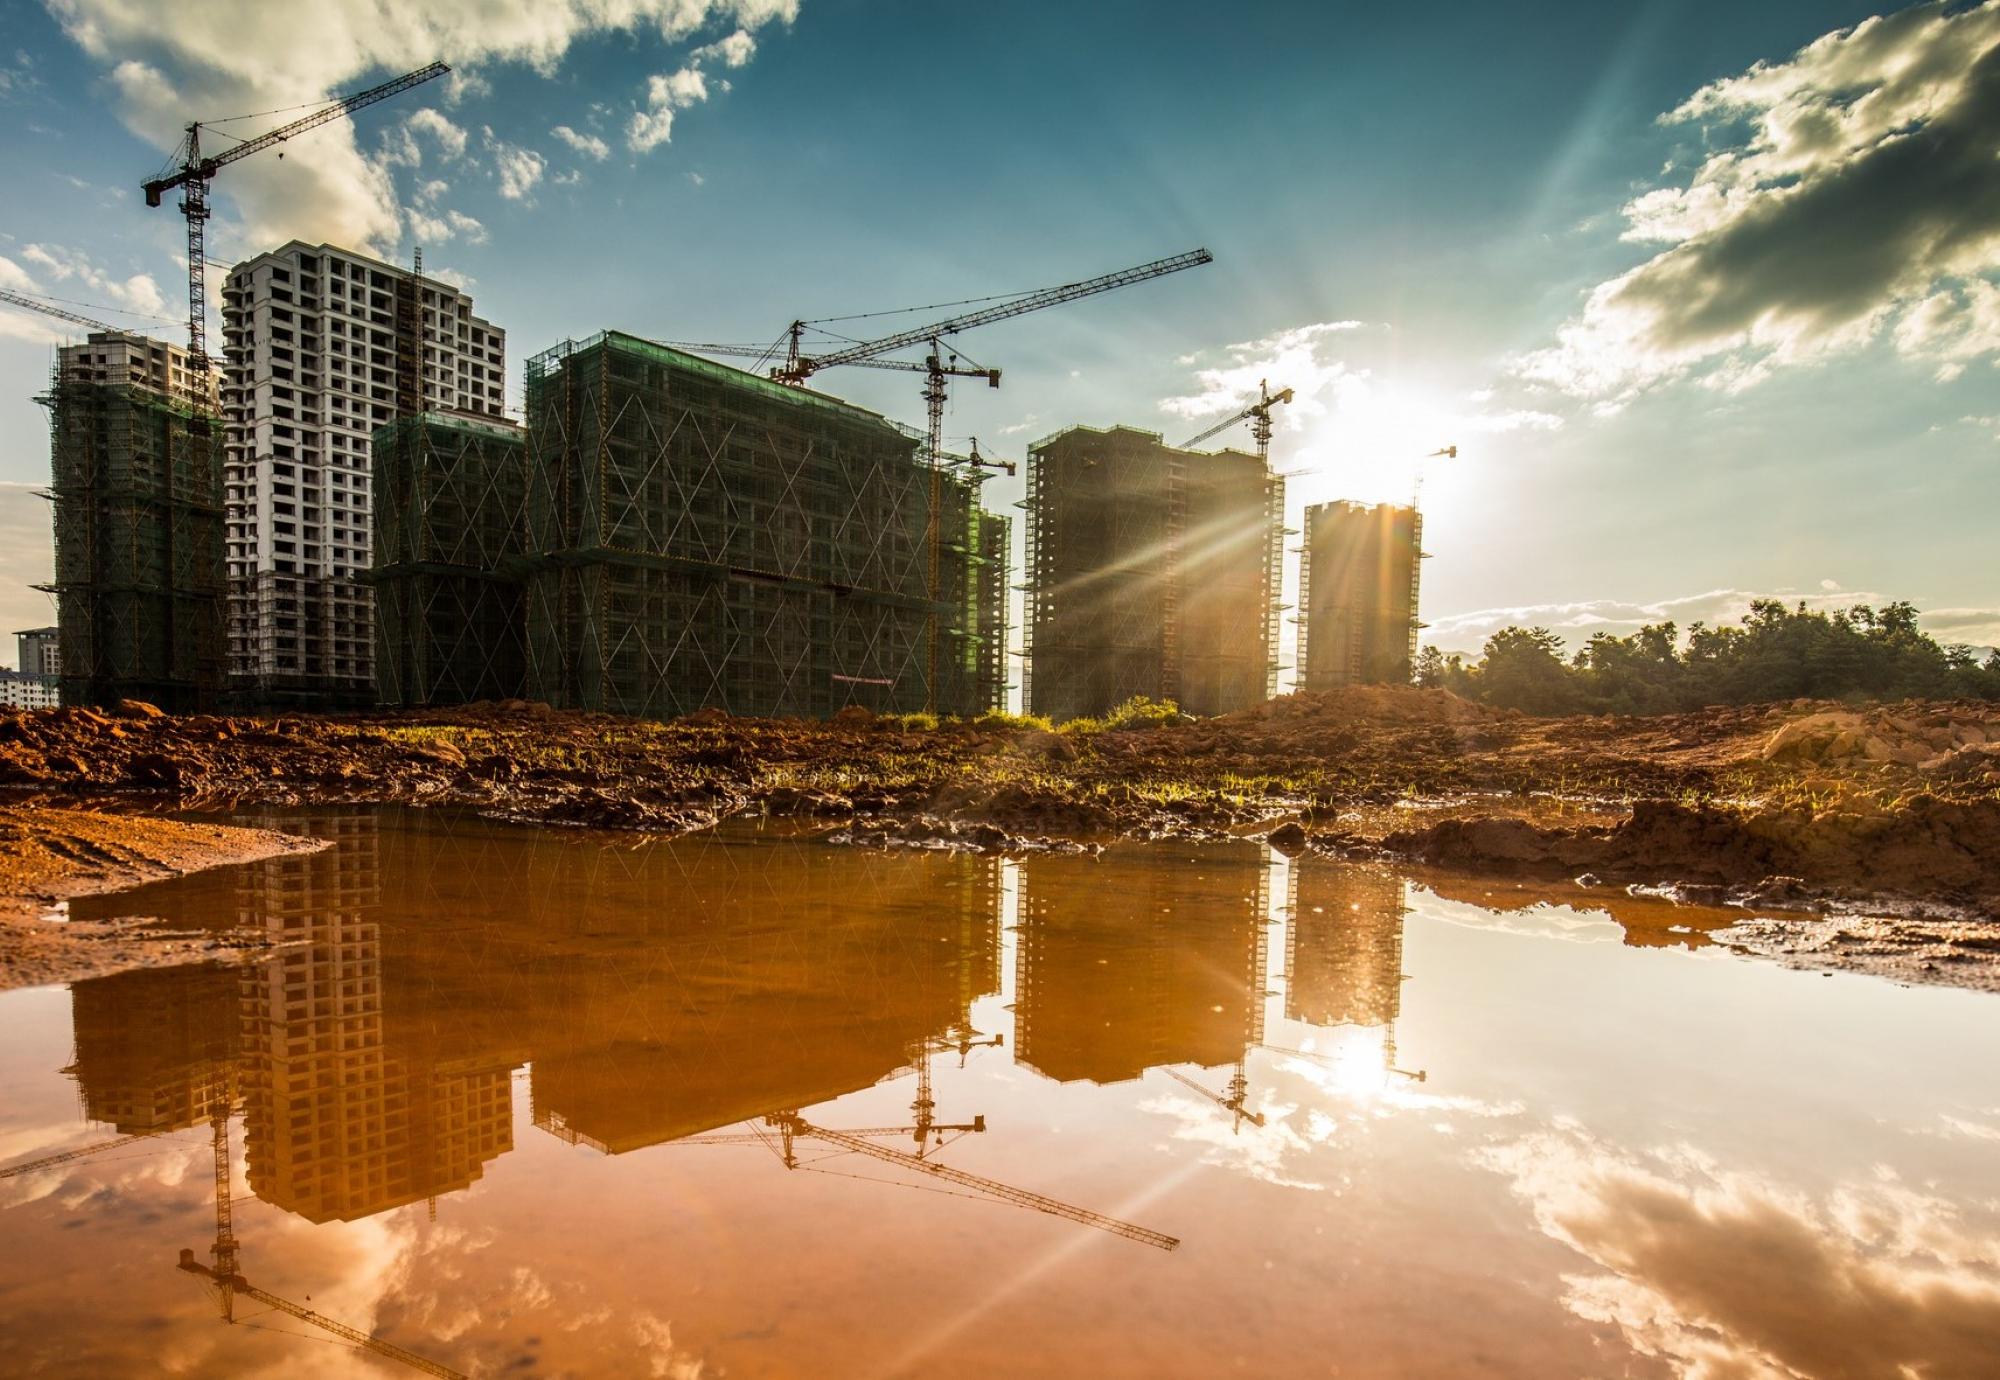 Construction site, with reflections off puddles on concrete in foreground